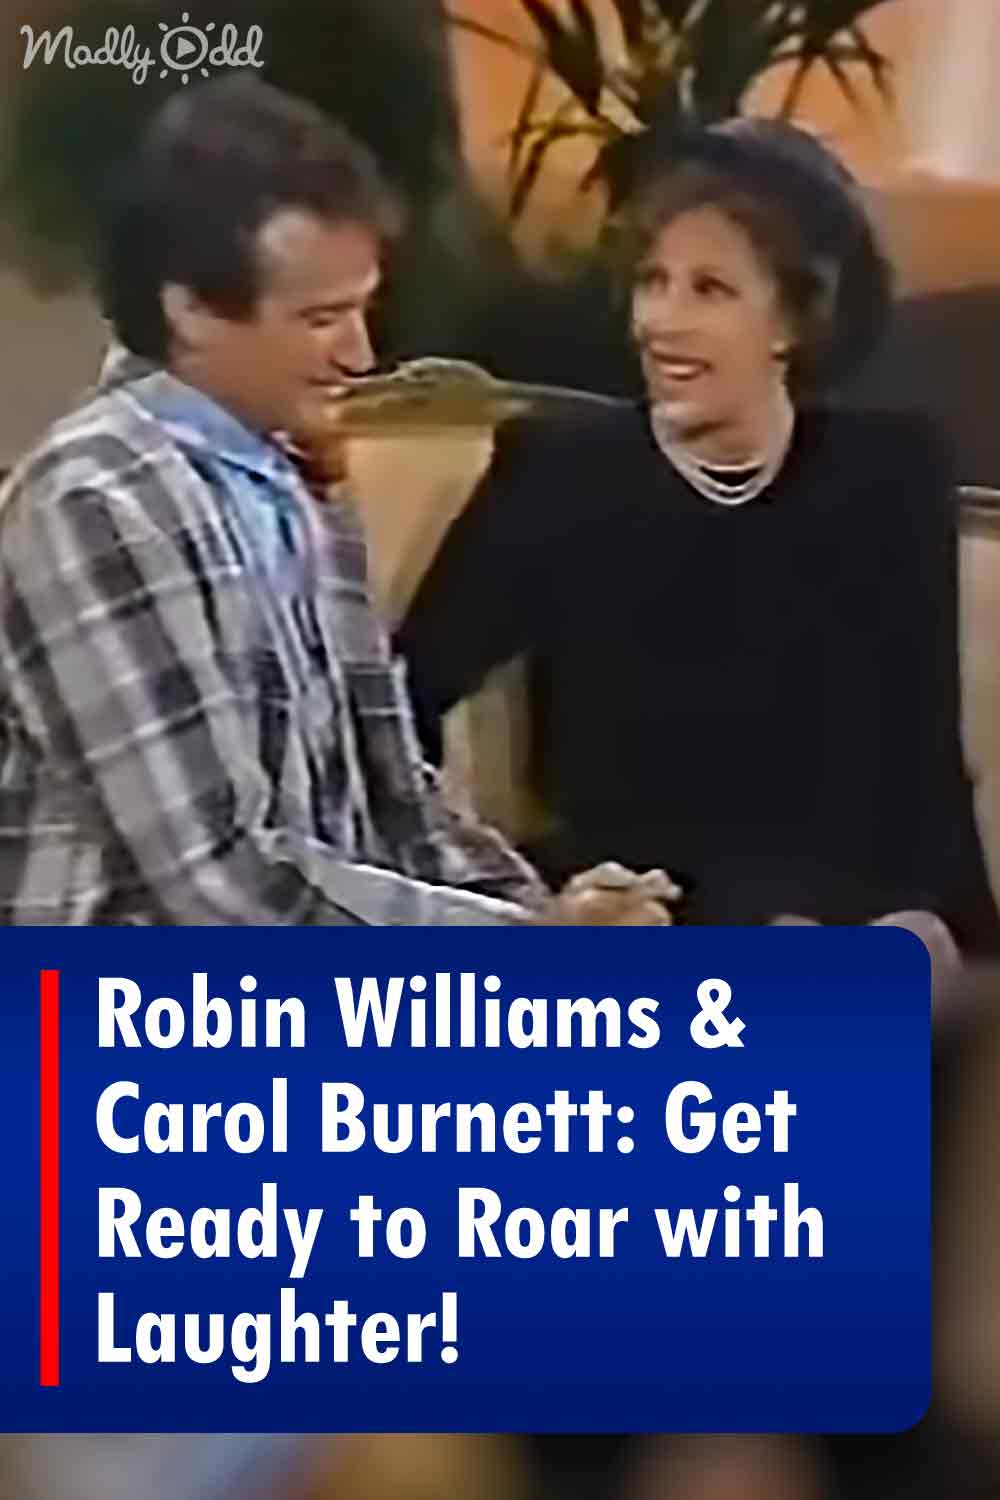 Robin Williams & Carol Burnett: Get Ready to Roar with Laughter!